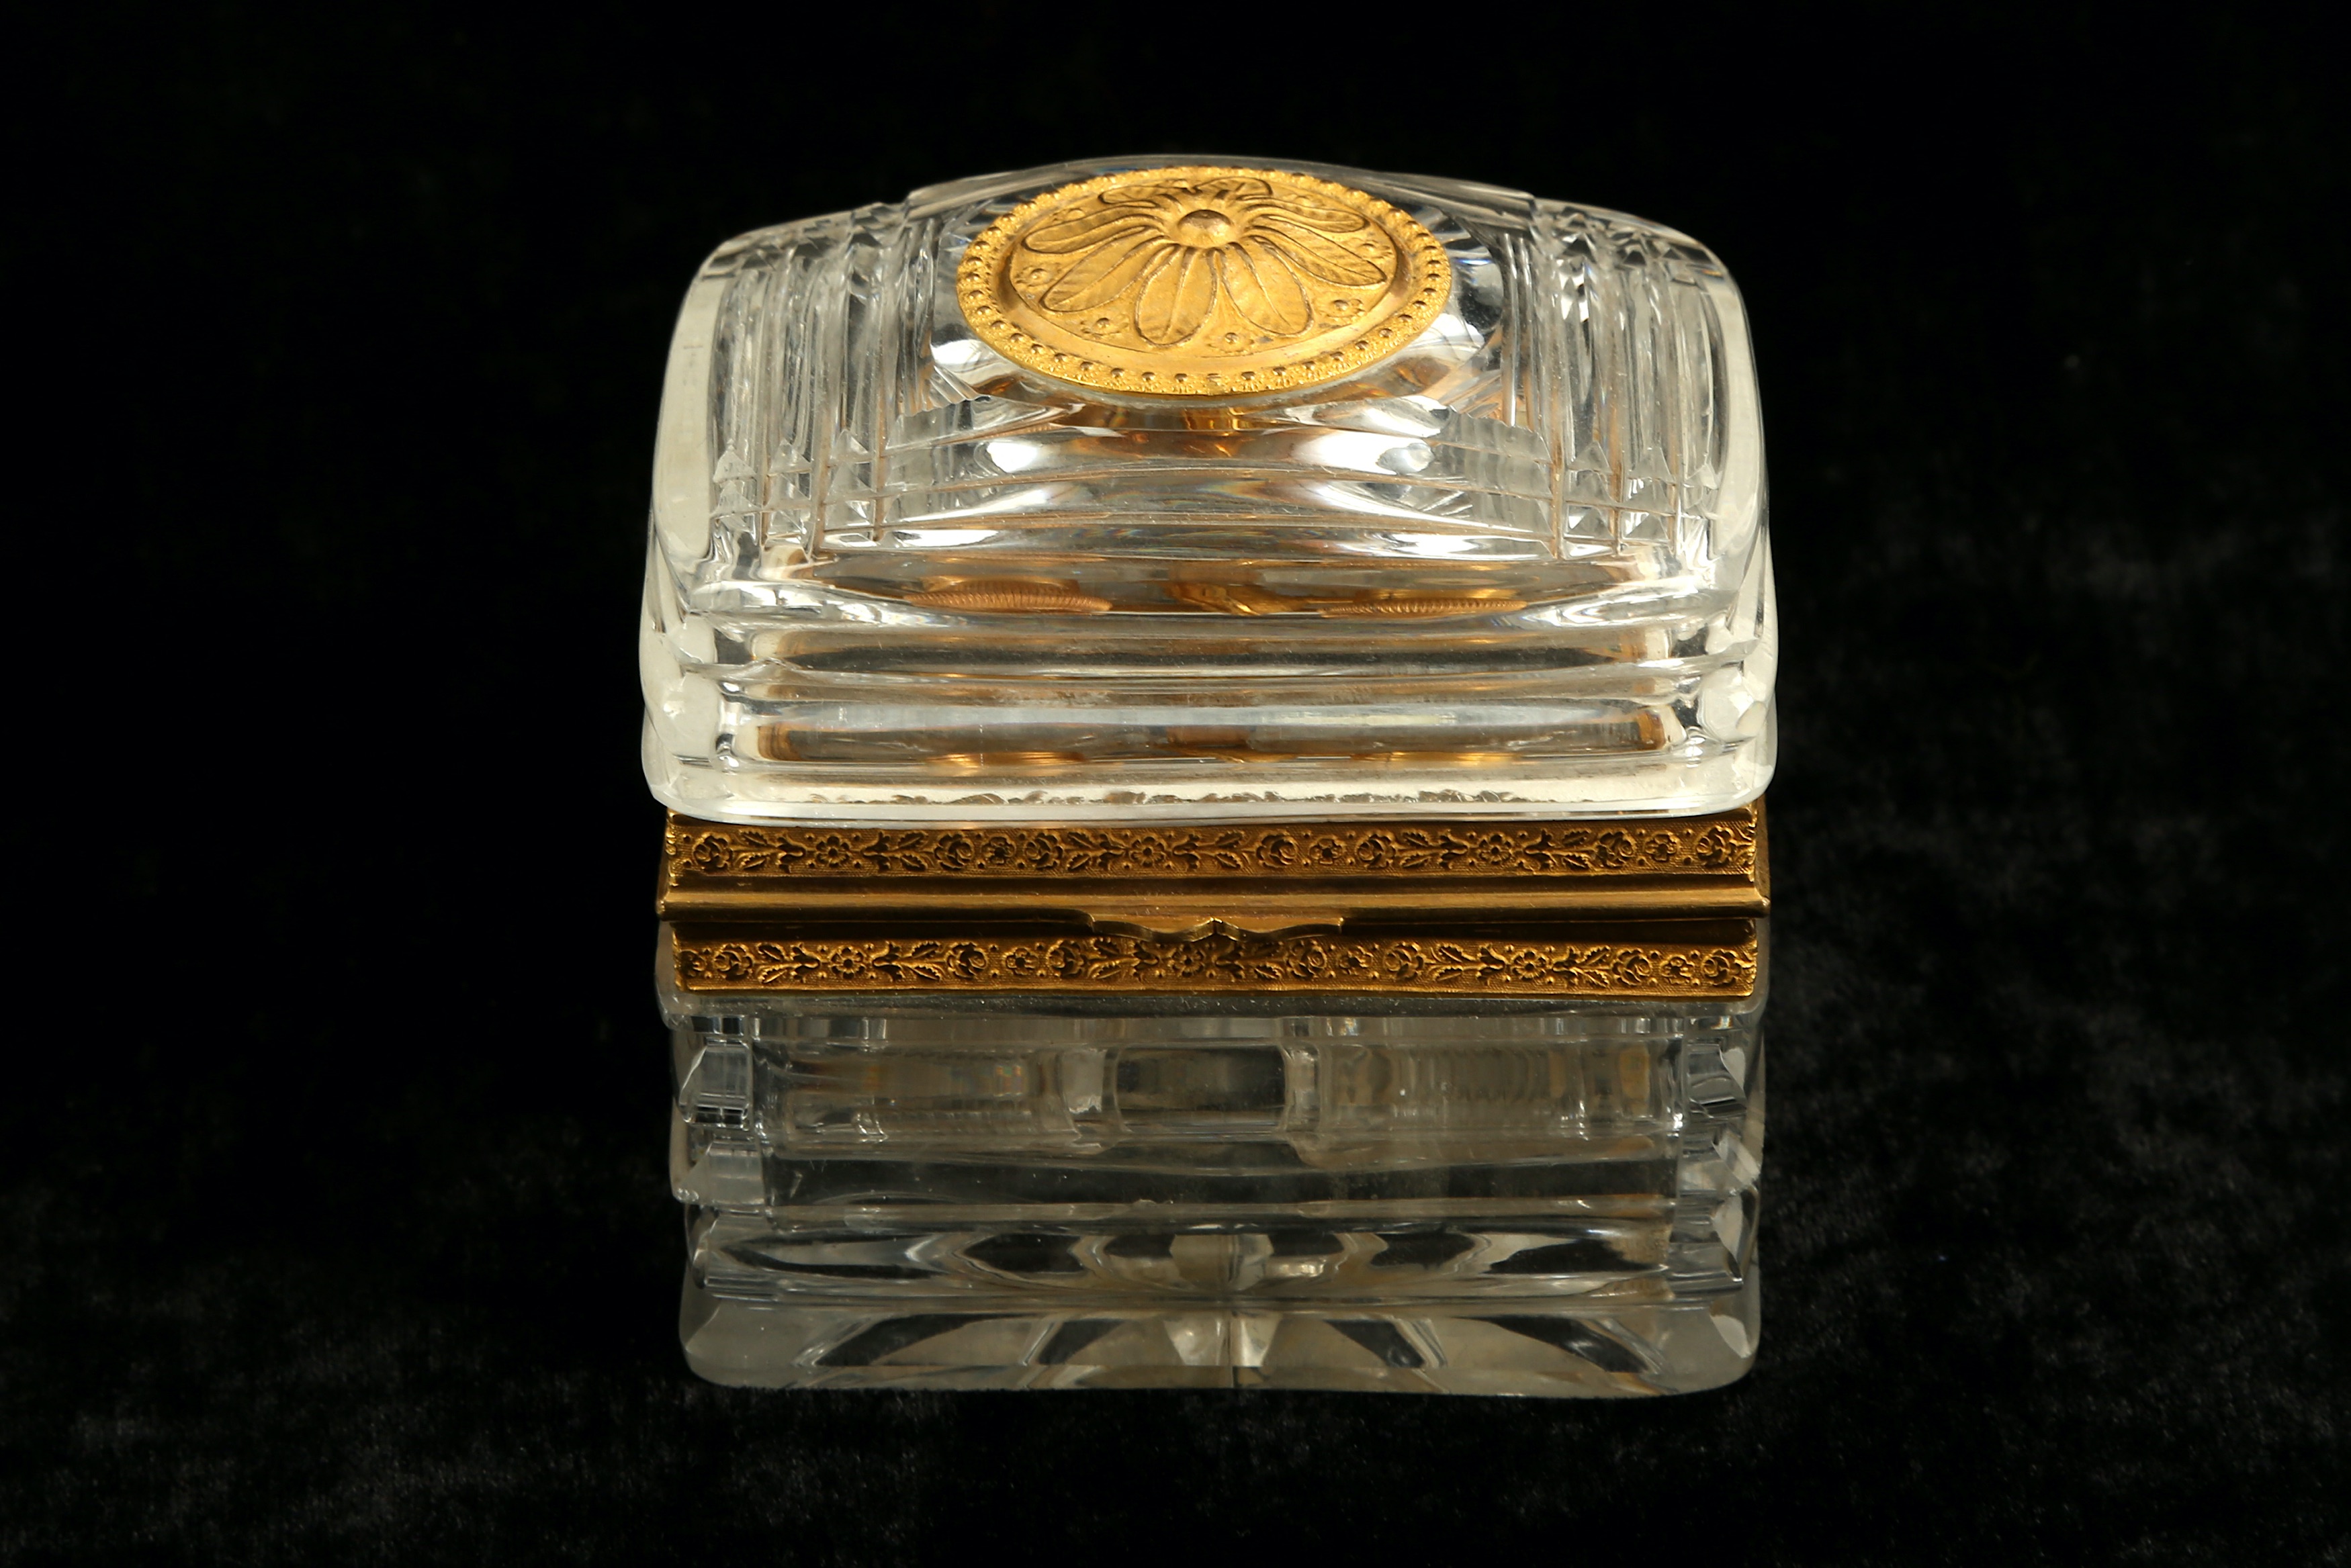 A 19th Century French Palais-Royal gilt bronze mounted glass perfume casket, circa 1830s, in the - Image 6 of 6